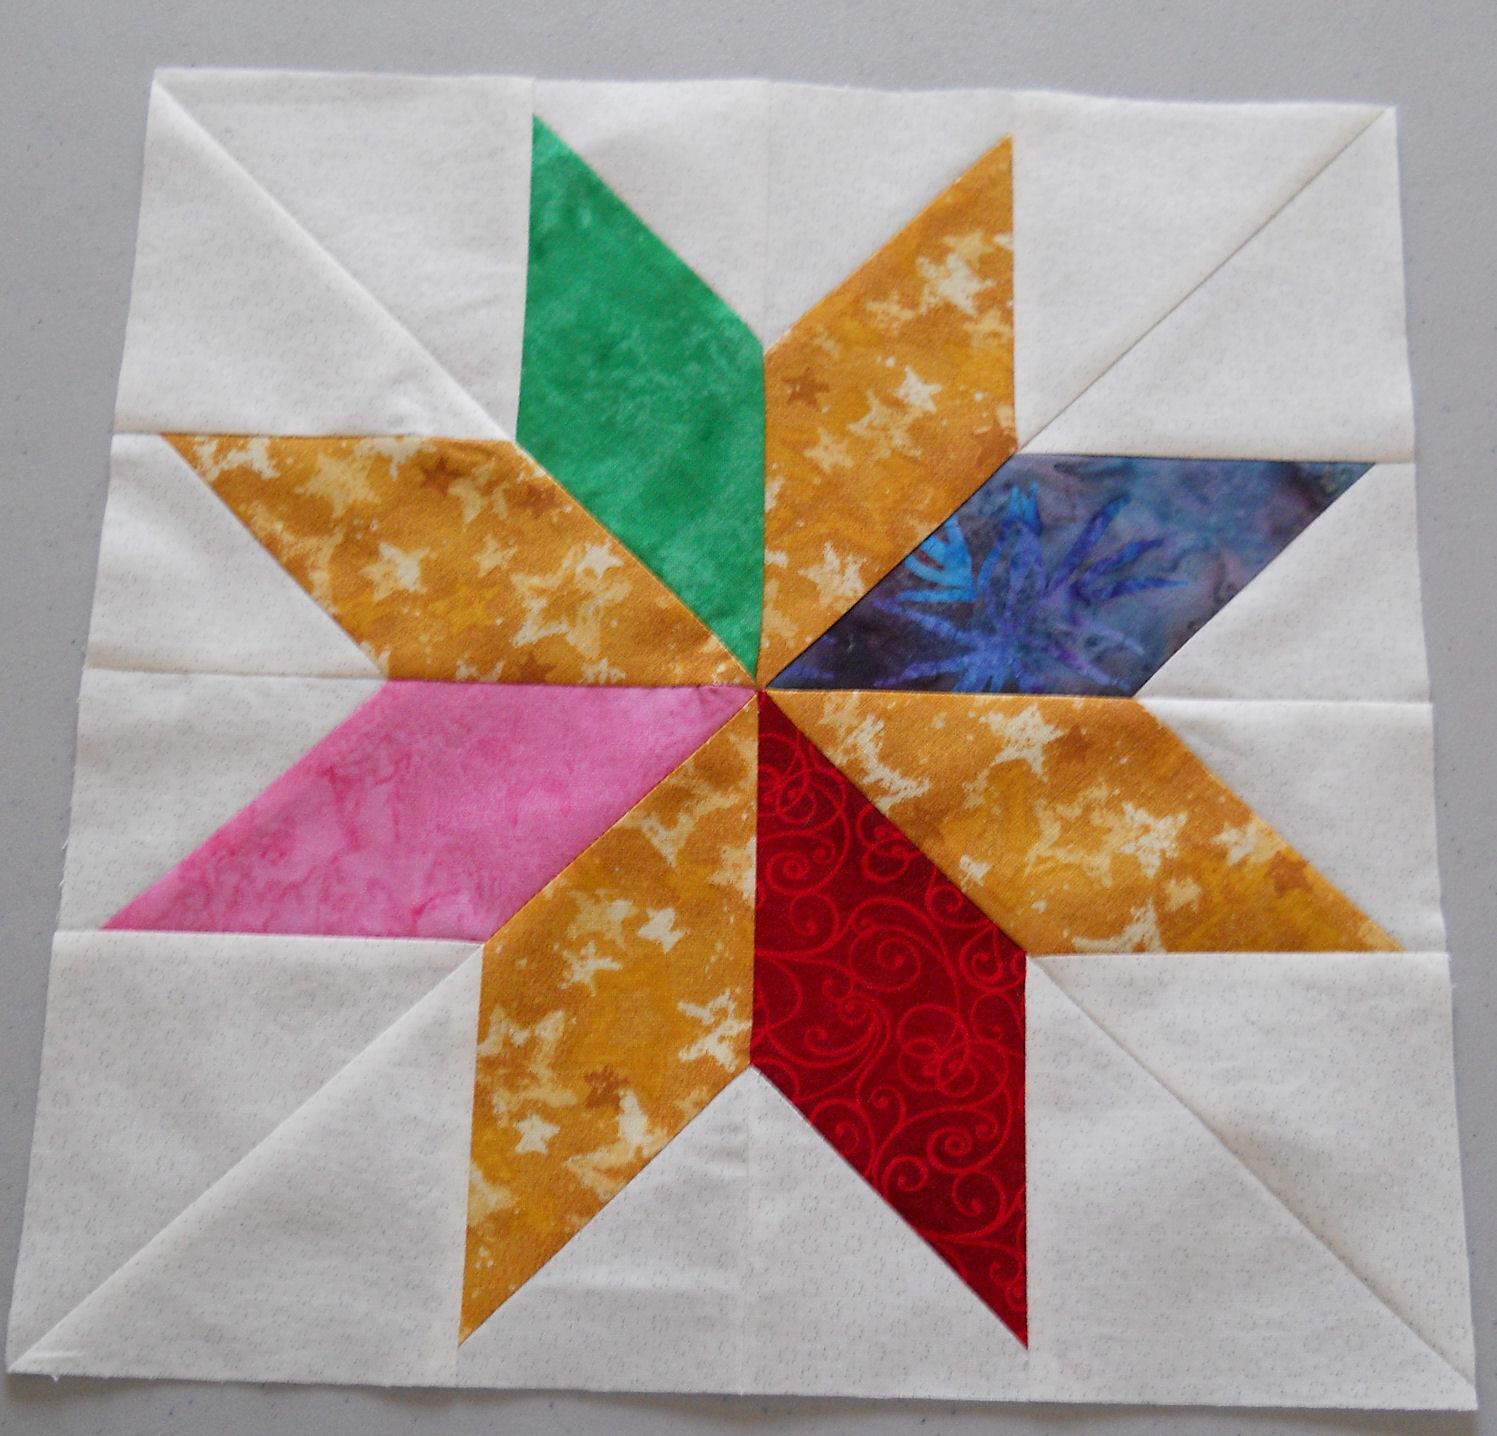 ramblingthreads-exploring-8-pointed-star-quilt-block-construction-options